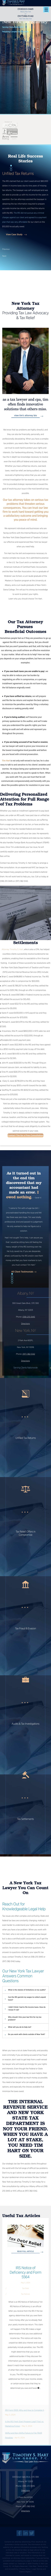 Timothy S. Hart, Tax Attorney and CPA - New York NY Lawyers